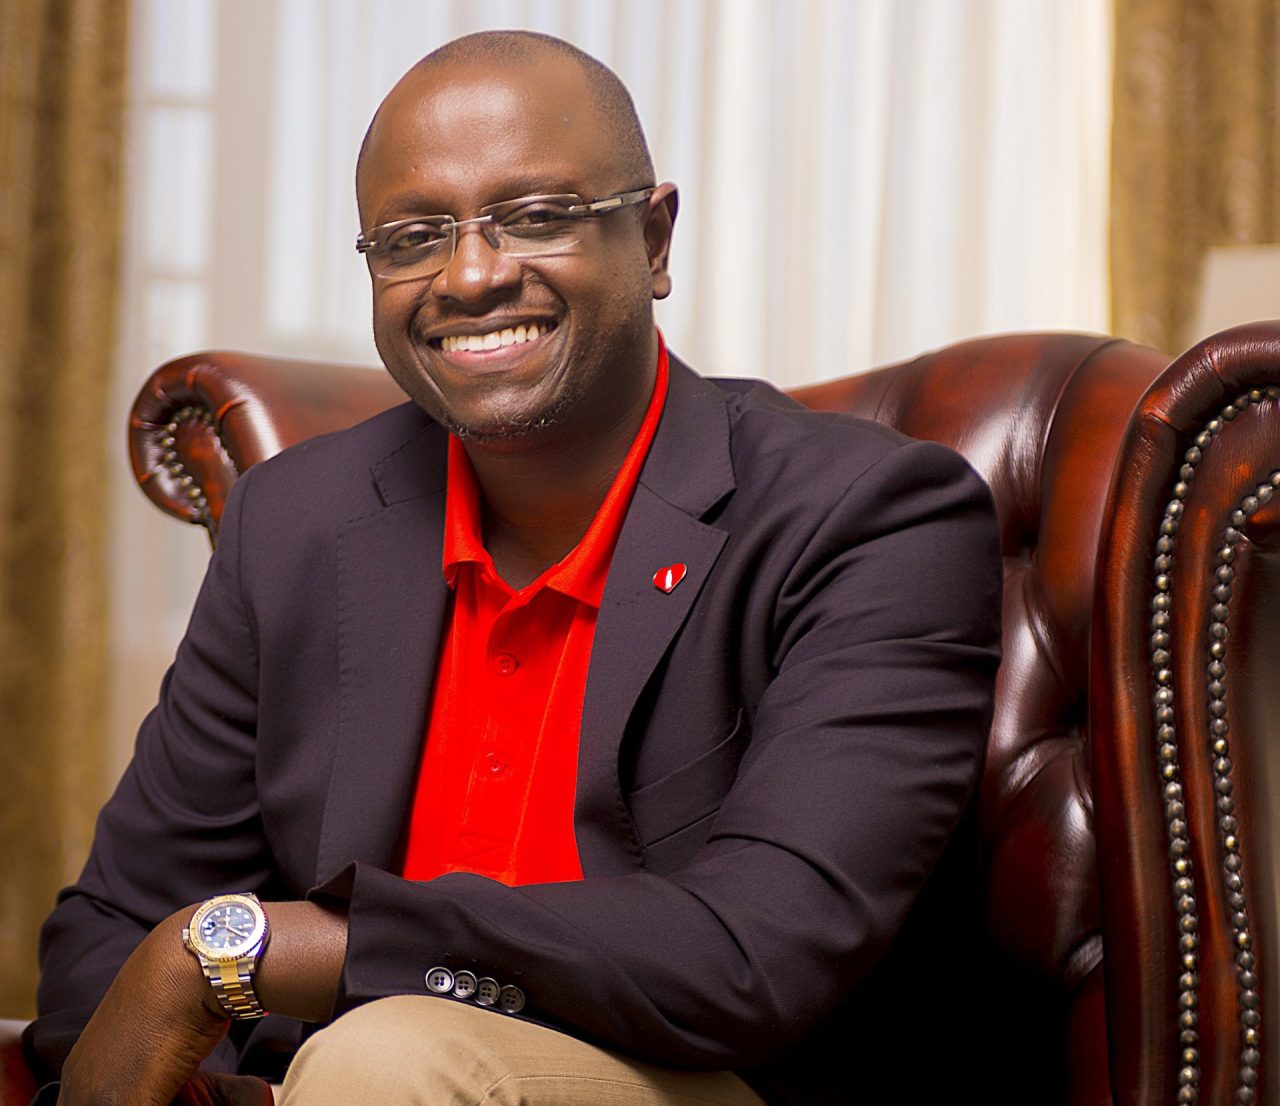 Twiga Foods Co Founder Peter Njonjo is leading innovation in food distribution across the continent